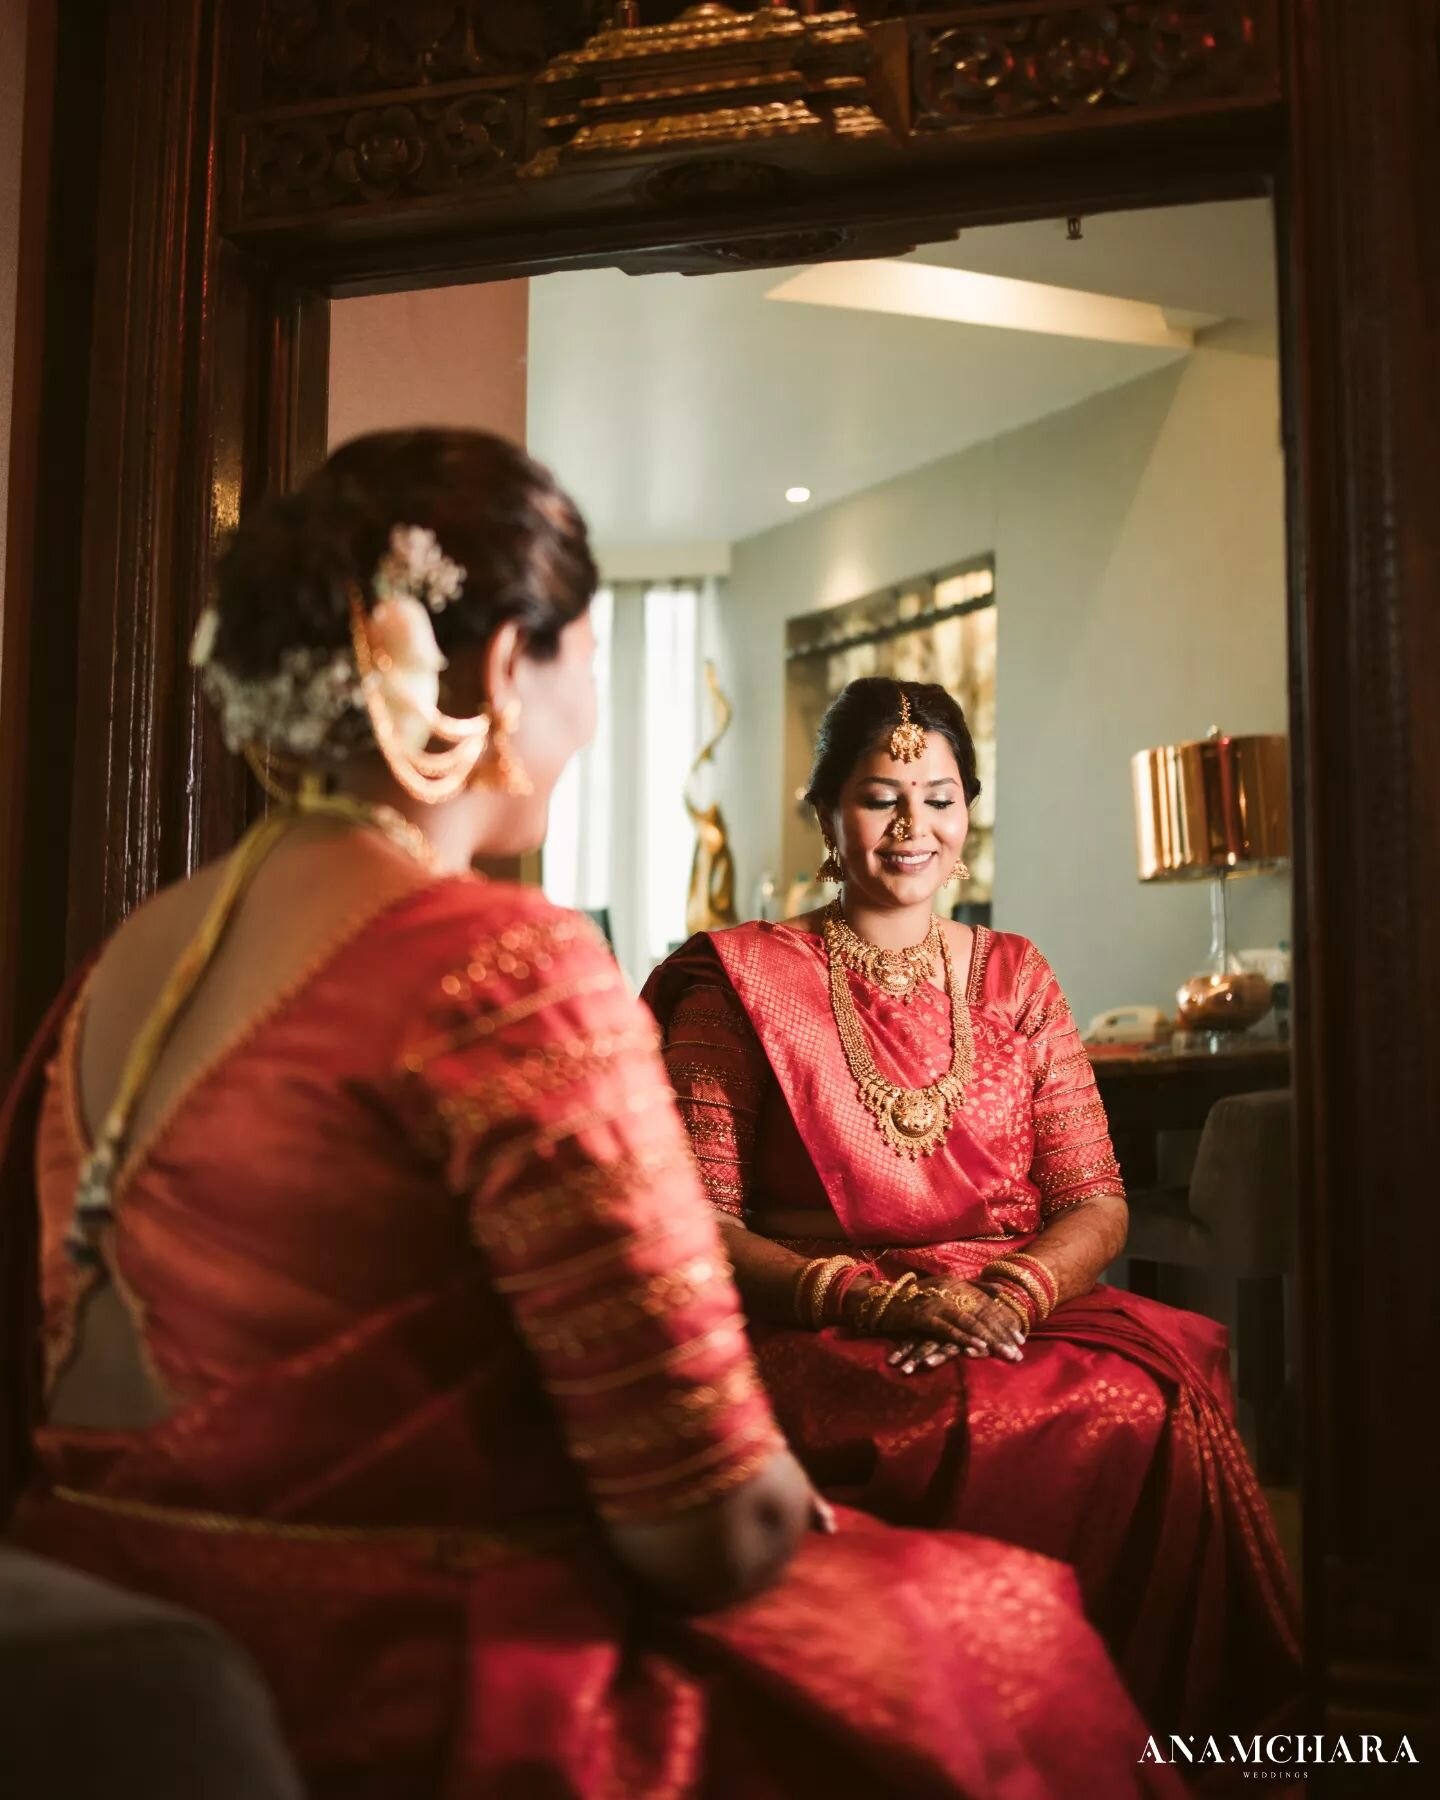 Sweetheart Spotlight: Payal steals the show with her sweet radiance, shining brighter than the chandelier and spreading joy with her infectious smile. #BrideCrushSaturday 

#anamcharaweddings #bride #brideoftheday #brideportrait #bridetrends #bridest